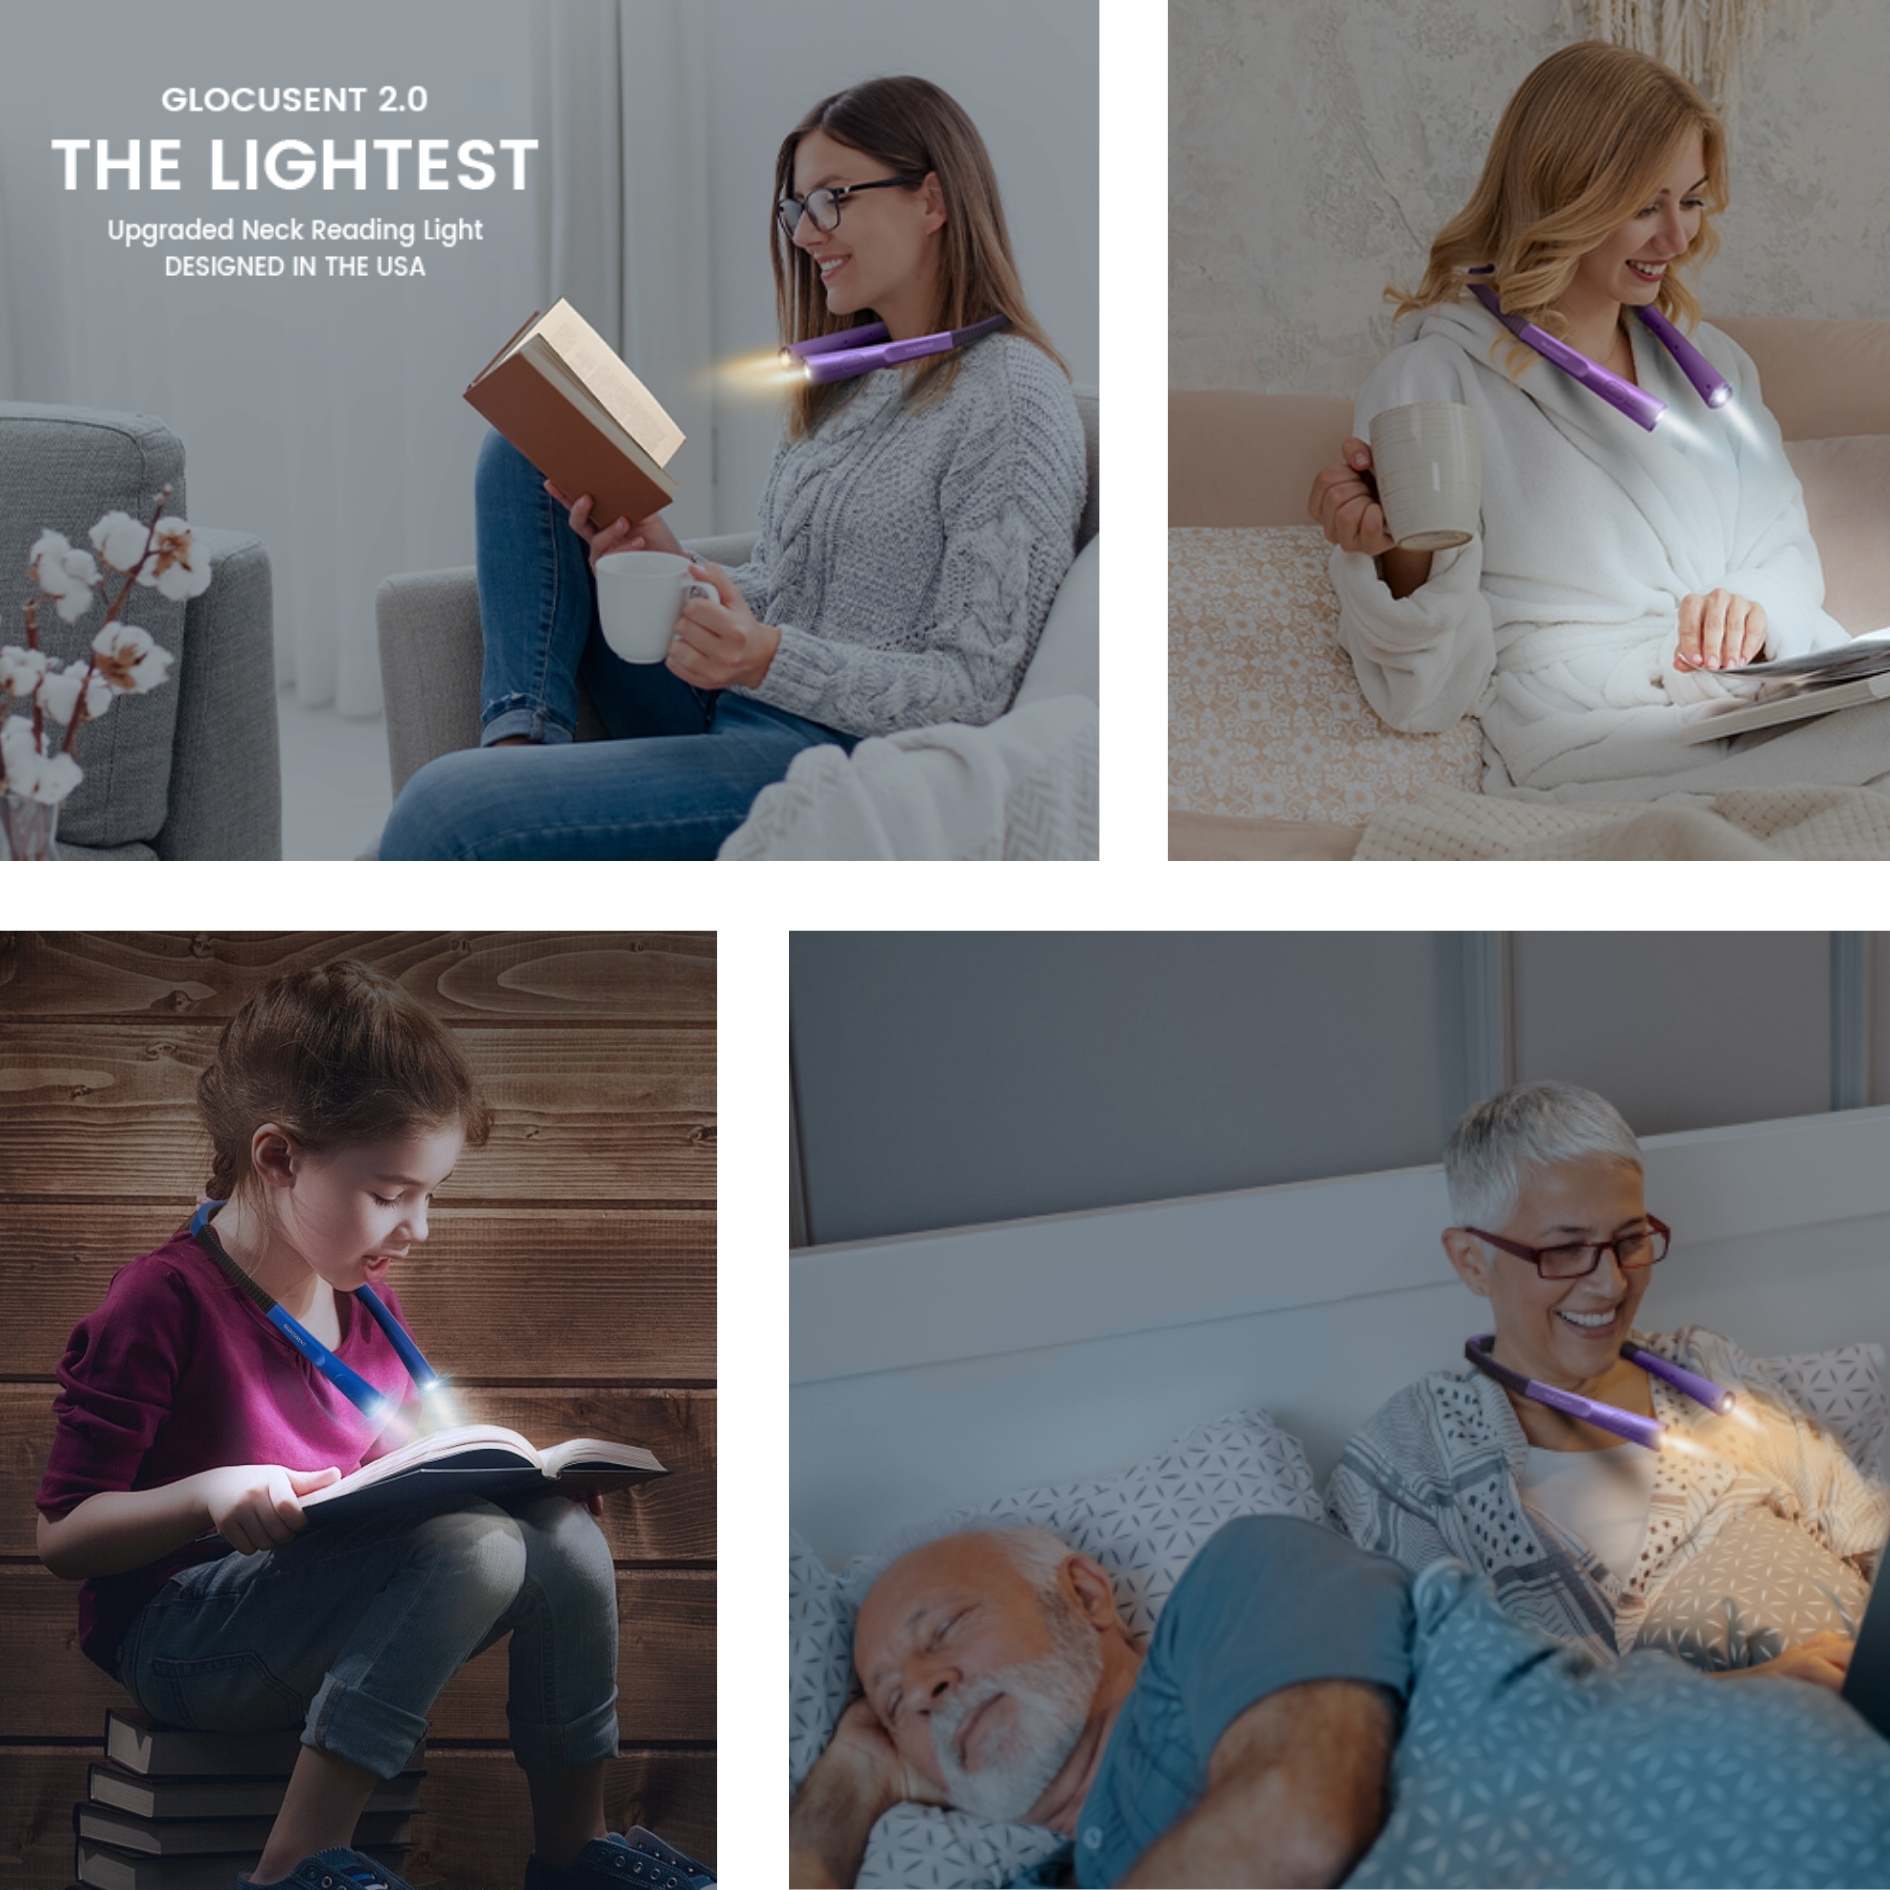 people reading using the neck light